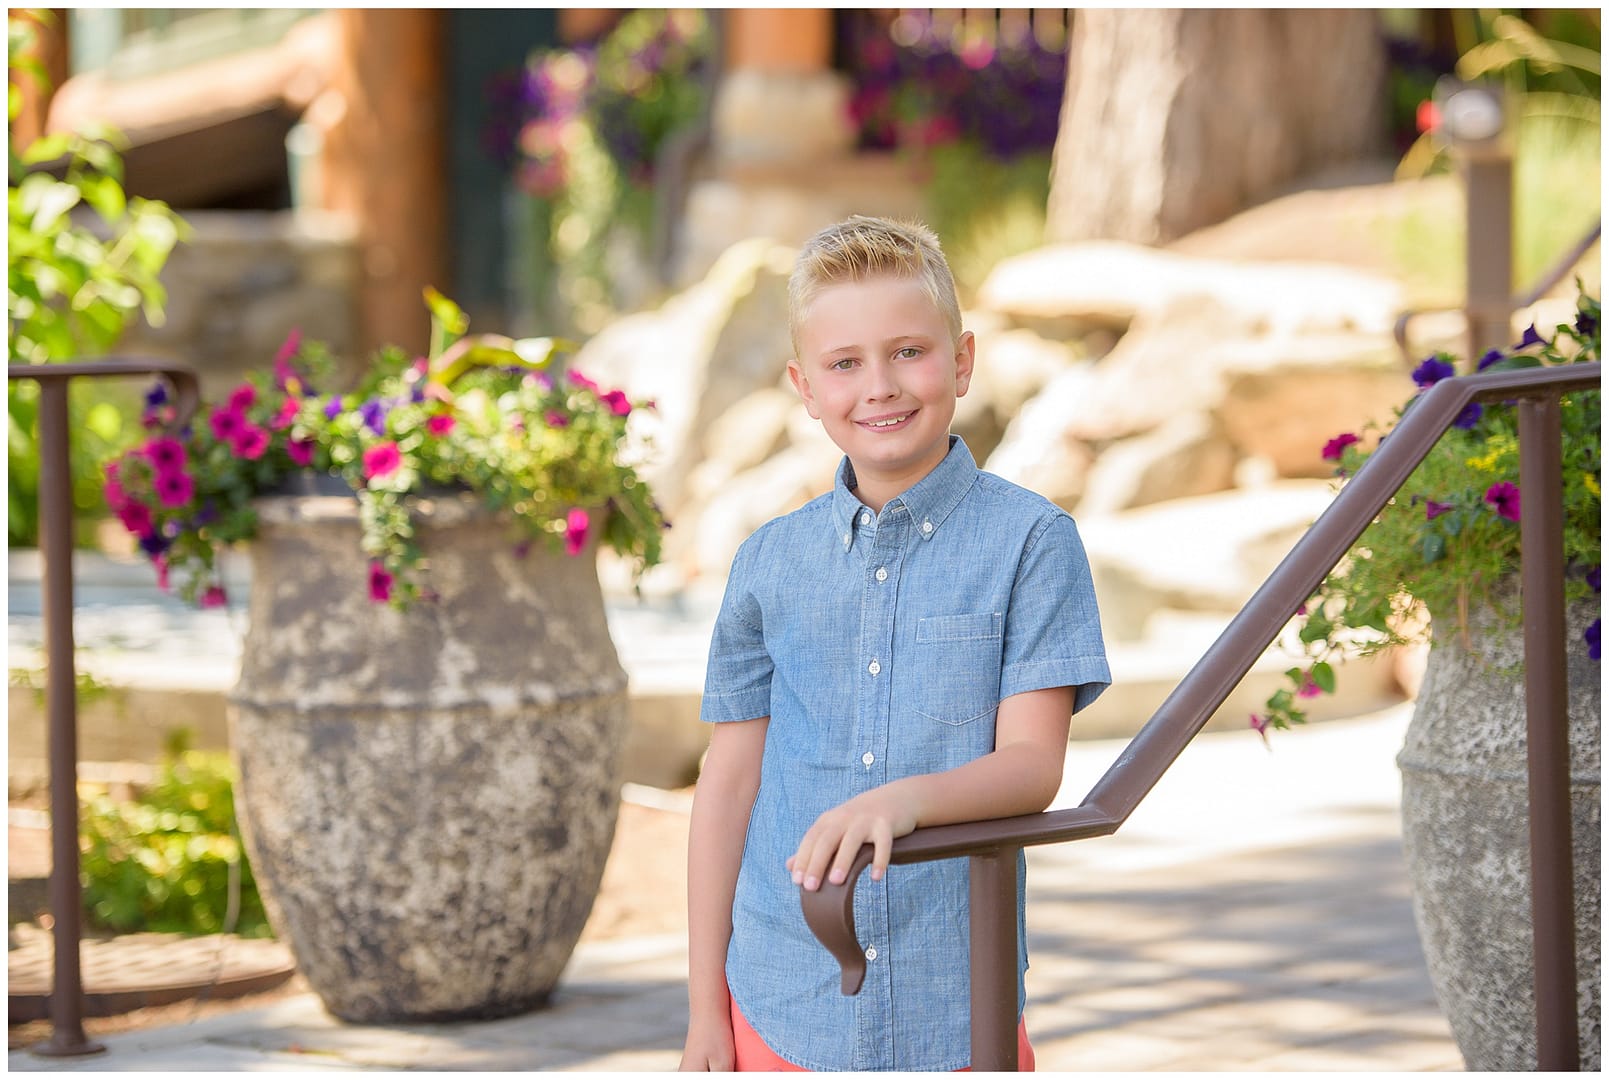 Young boy poses for portrait in McCall, ID. Photo by Tiffany Hix Photography.